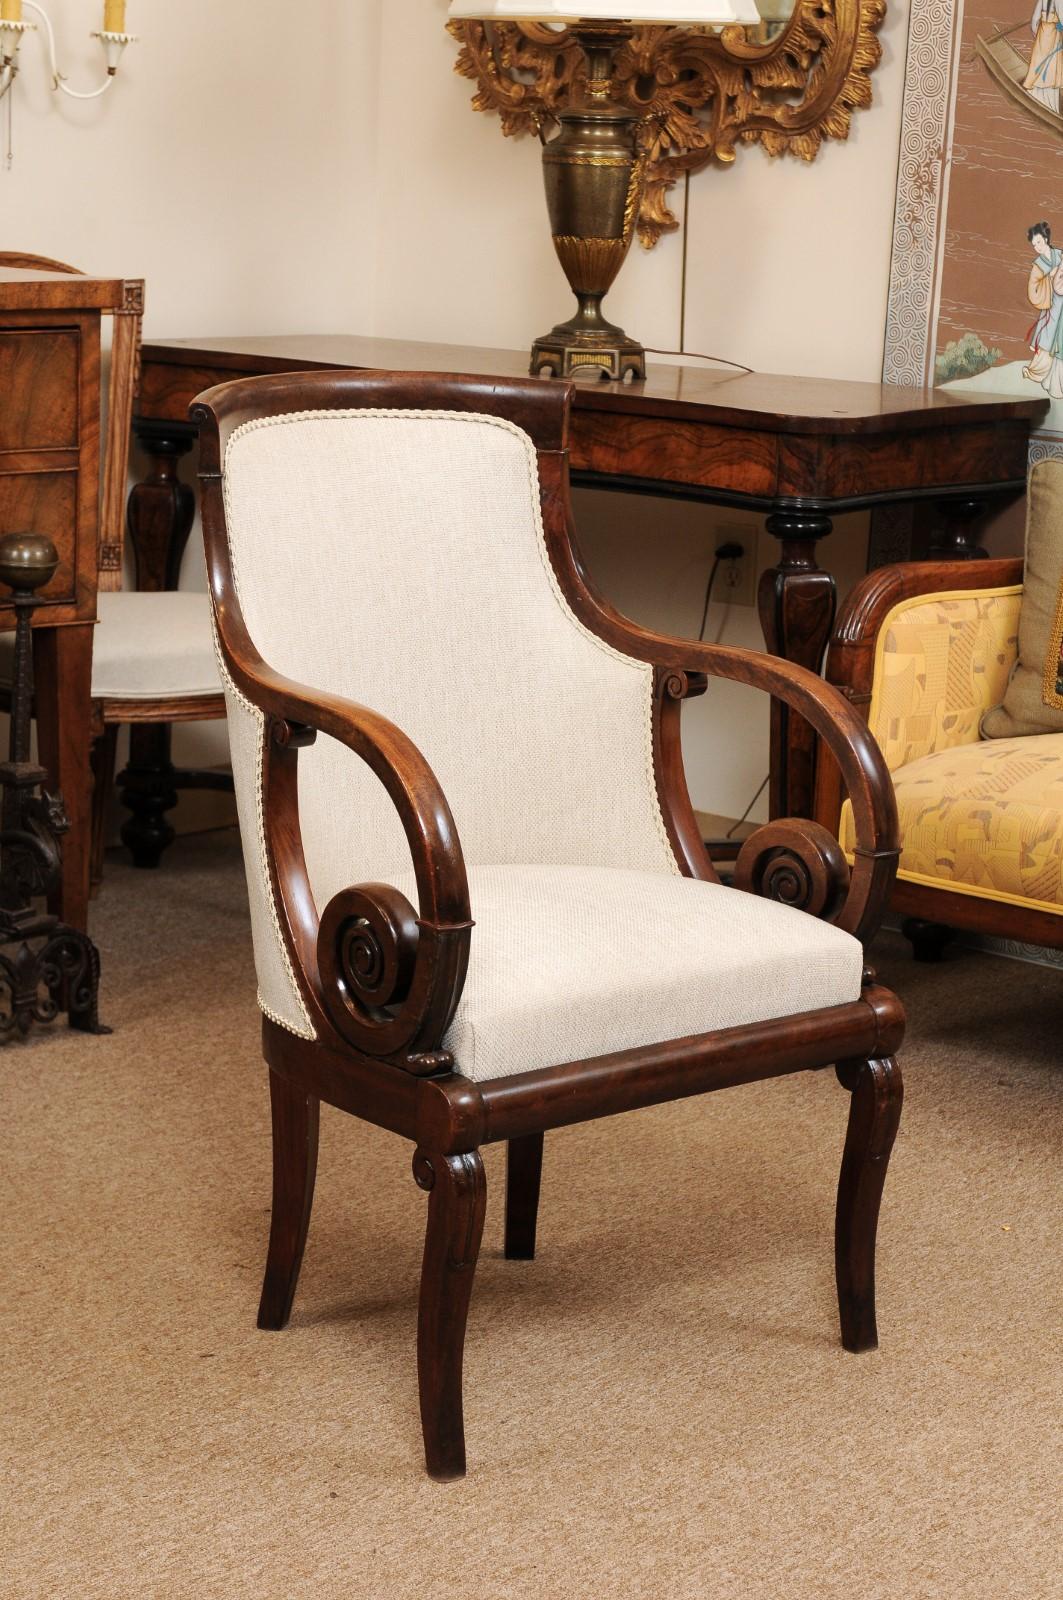 An early 19th century Empire mahogany fauteuil/armchair featuring rounded back, linen upholstery and scroll arms.